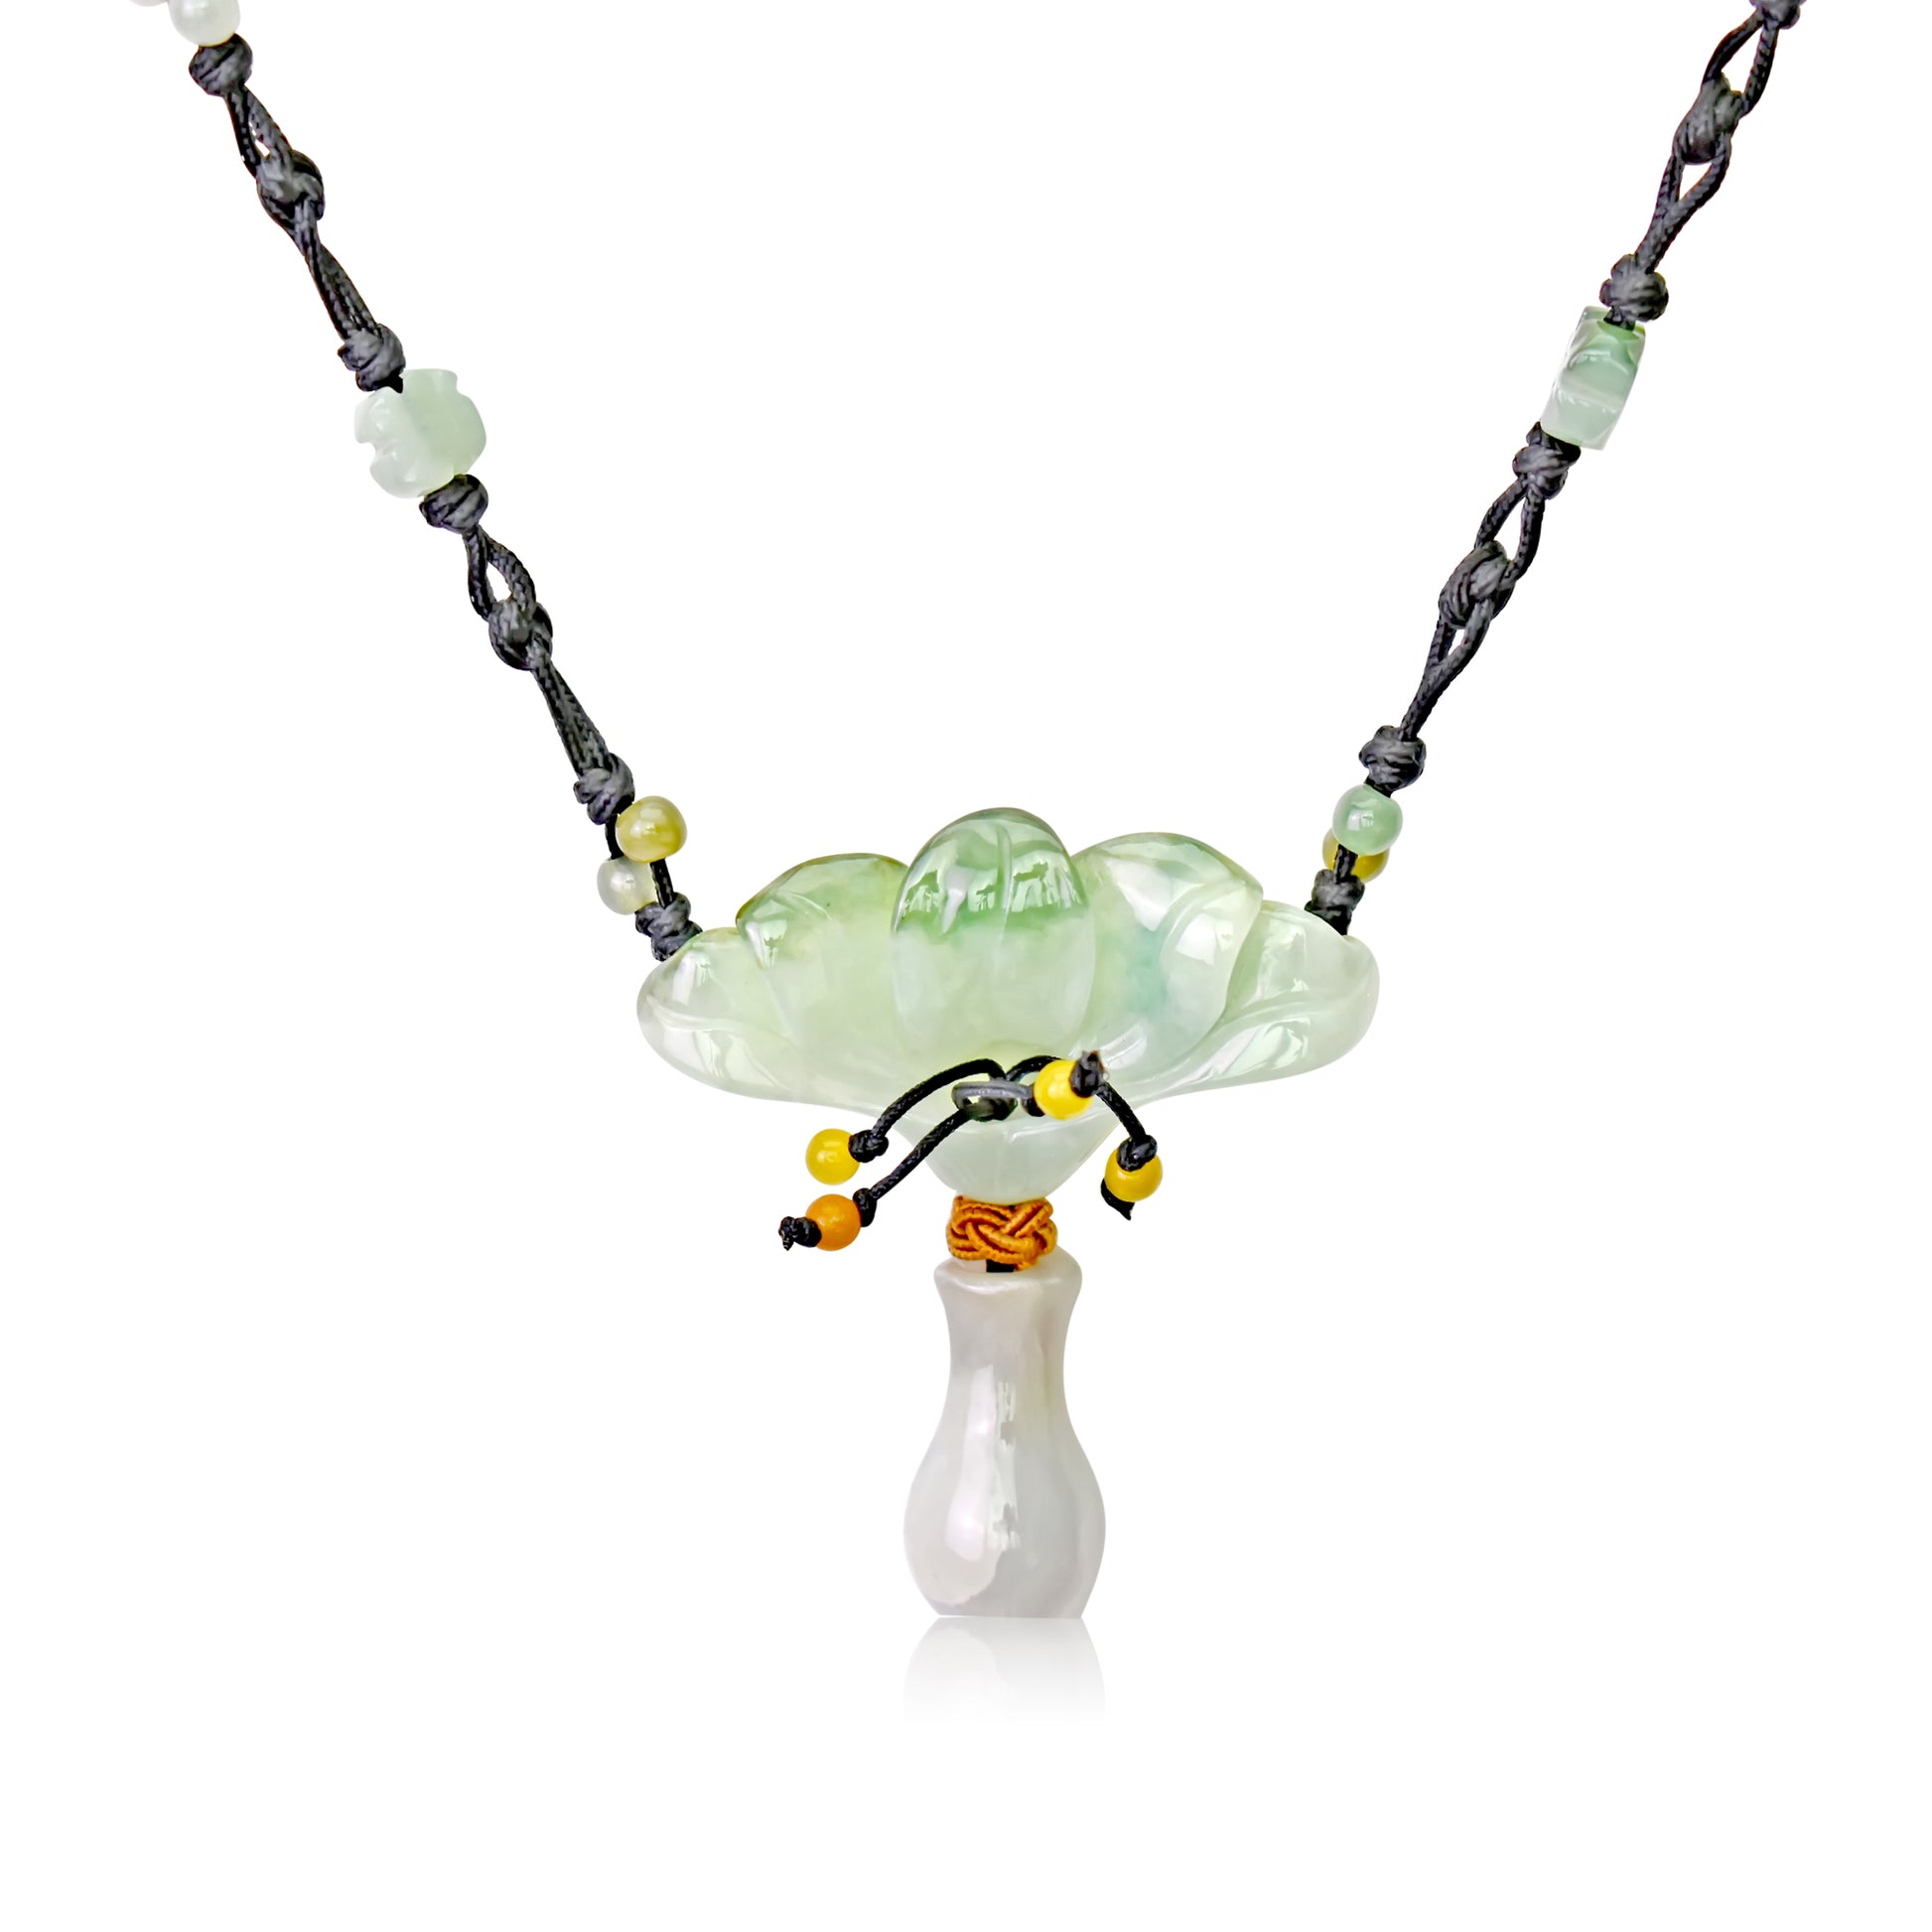 Achieve Beauty and Integrity with Peacock Flower Jade Necklace made with Black Cord